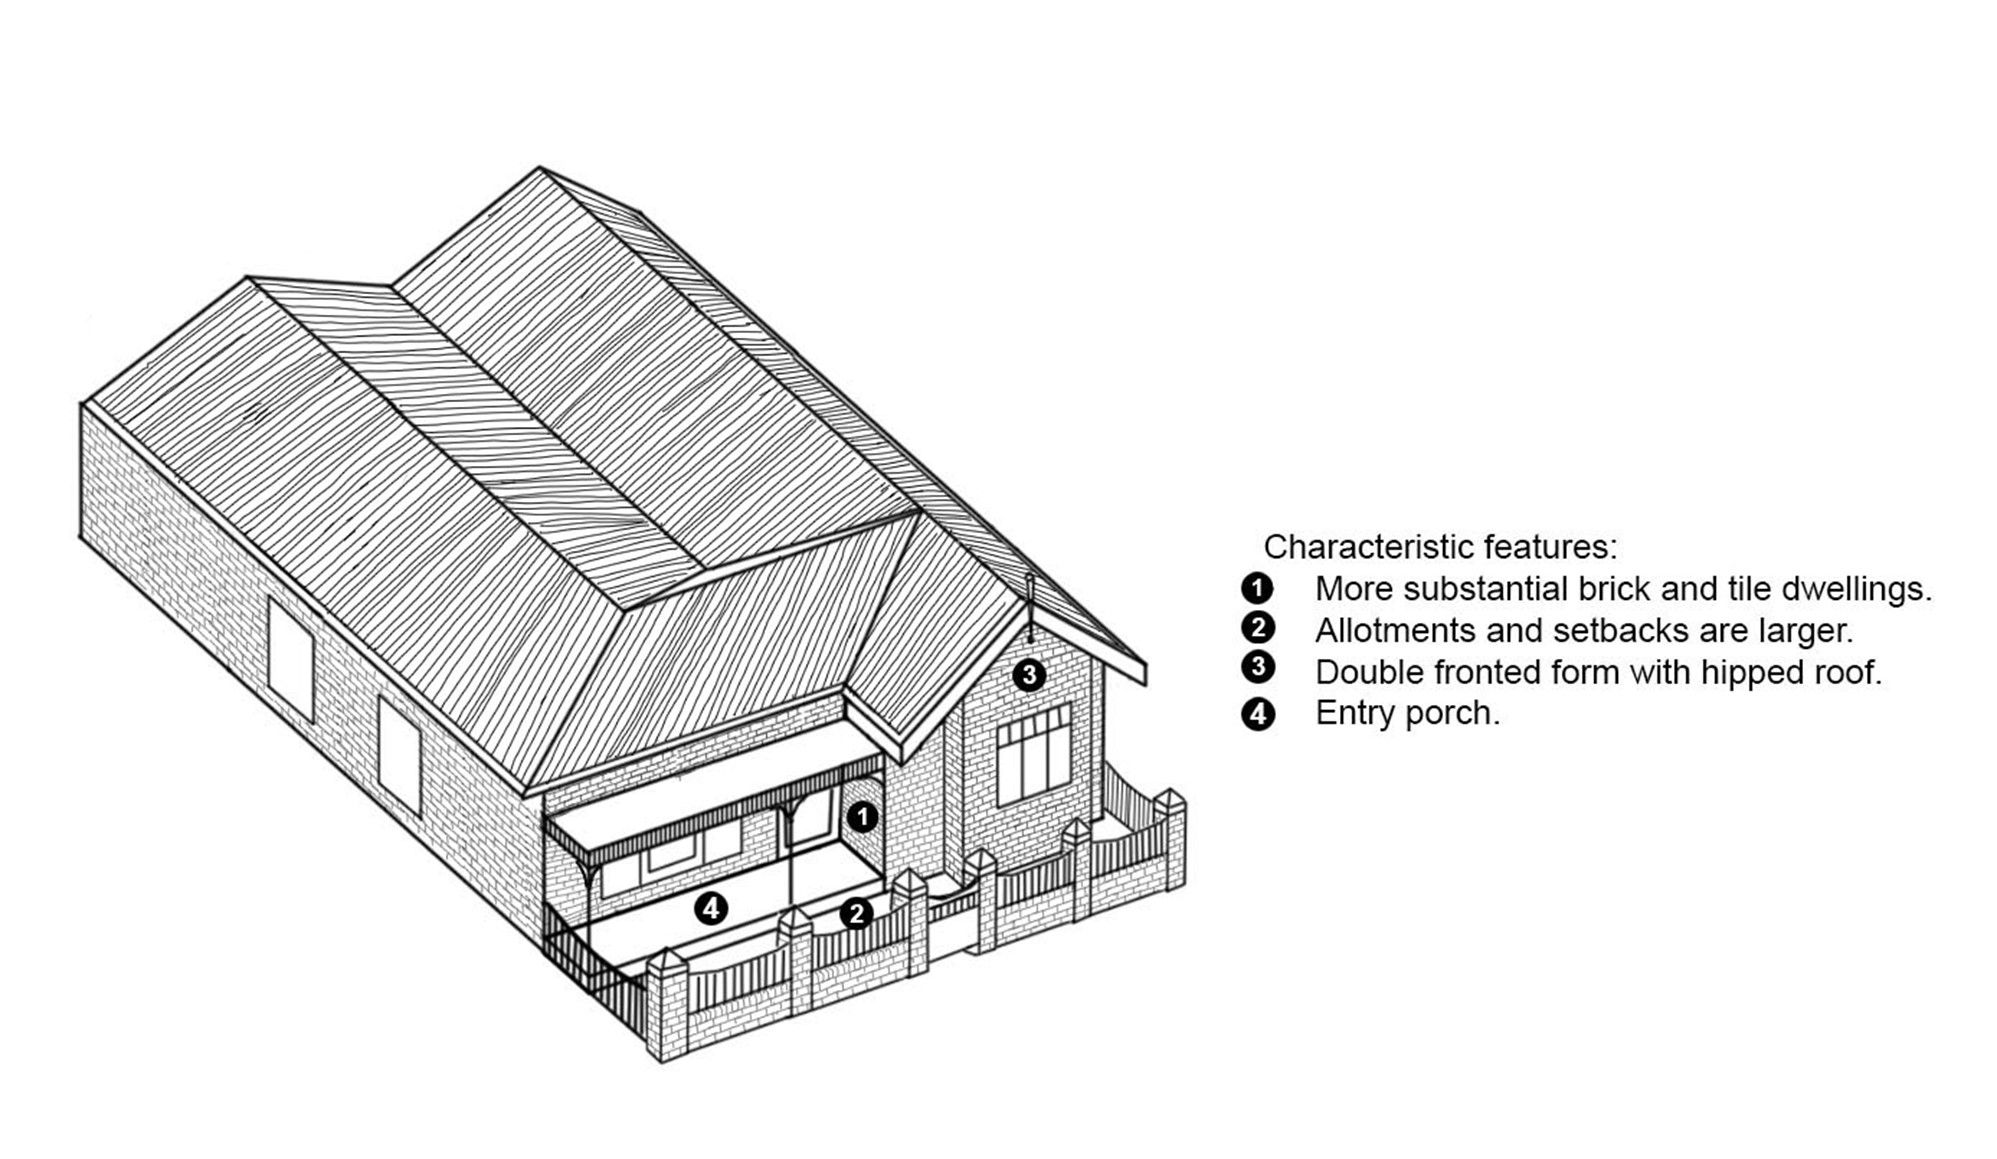 Figure-E3-04-Characteristics-of-early-20th-century-cottages